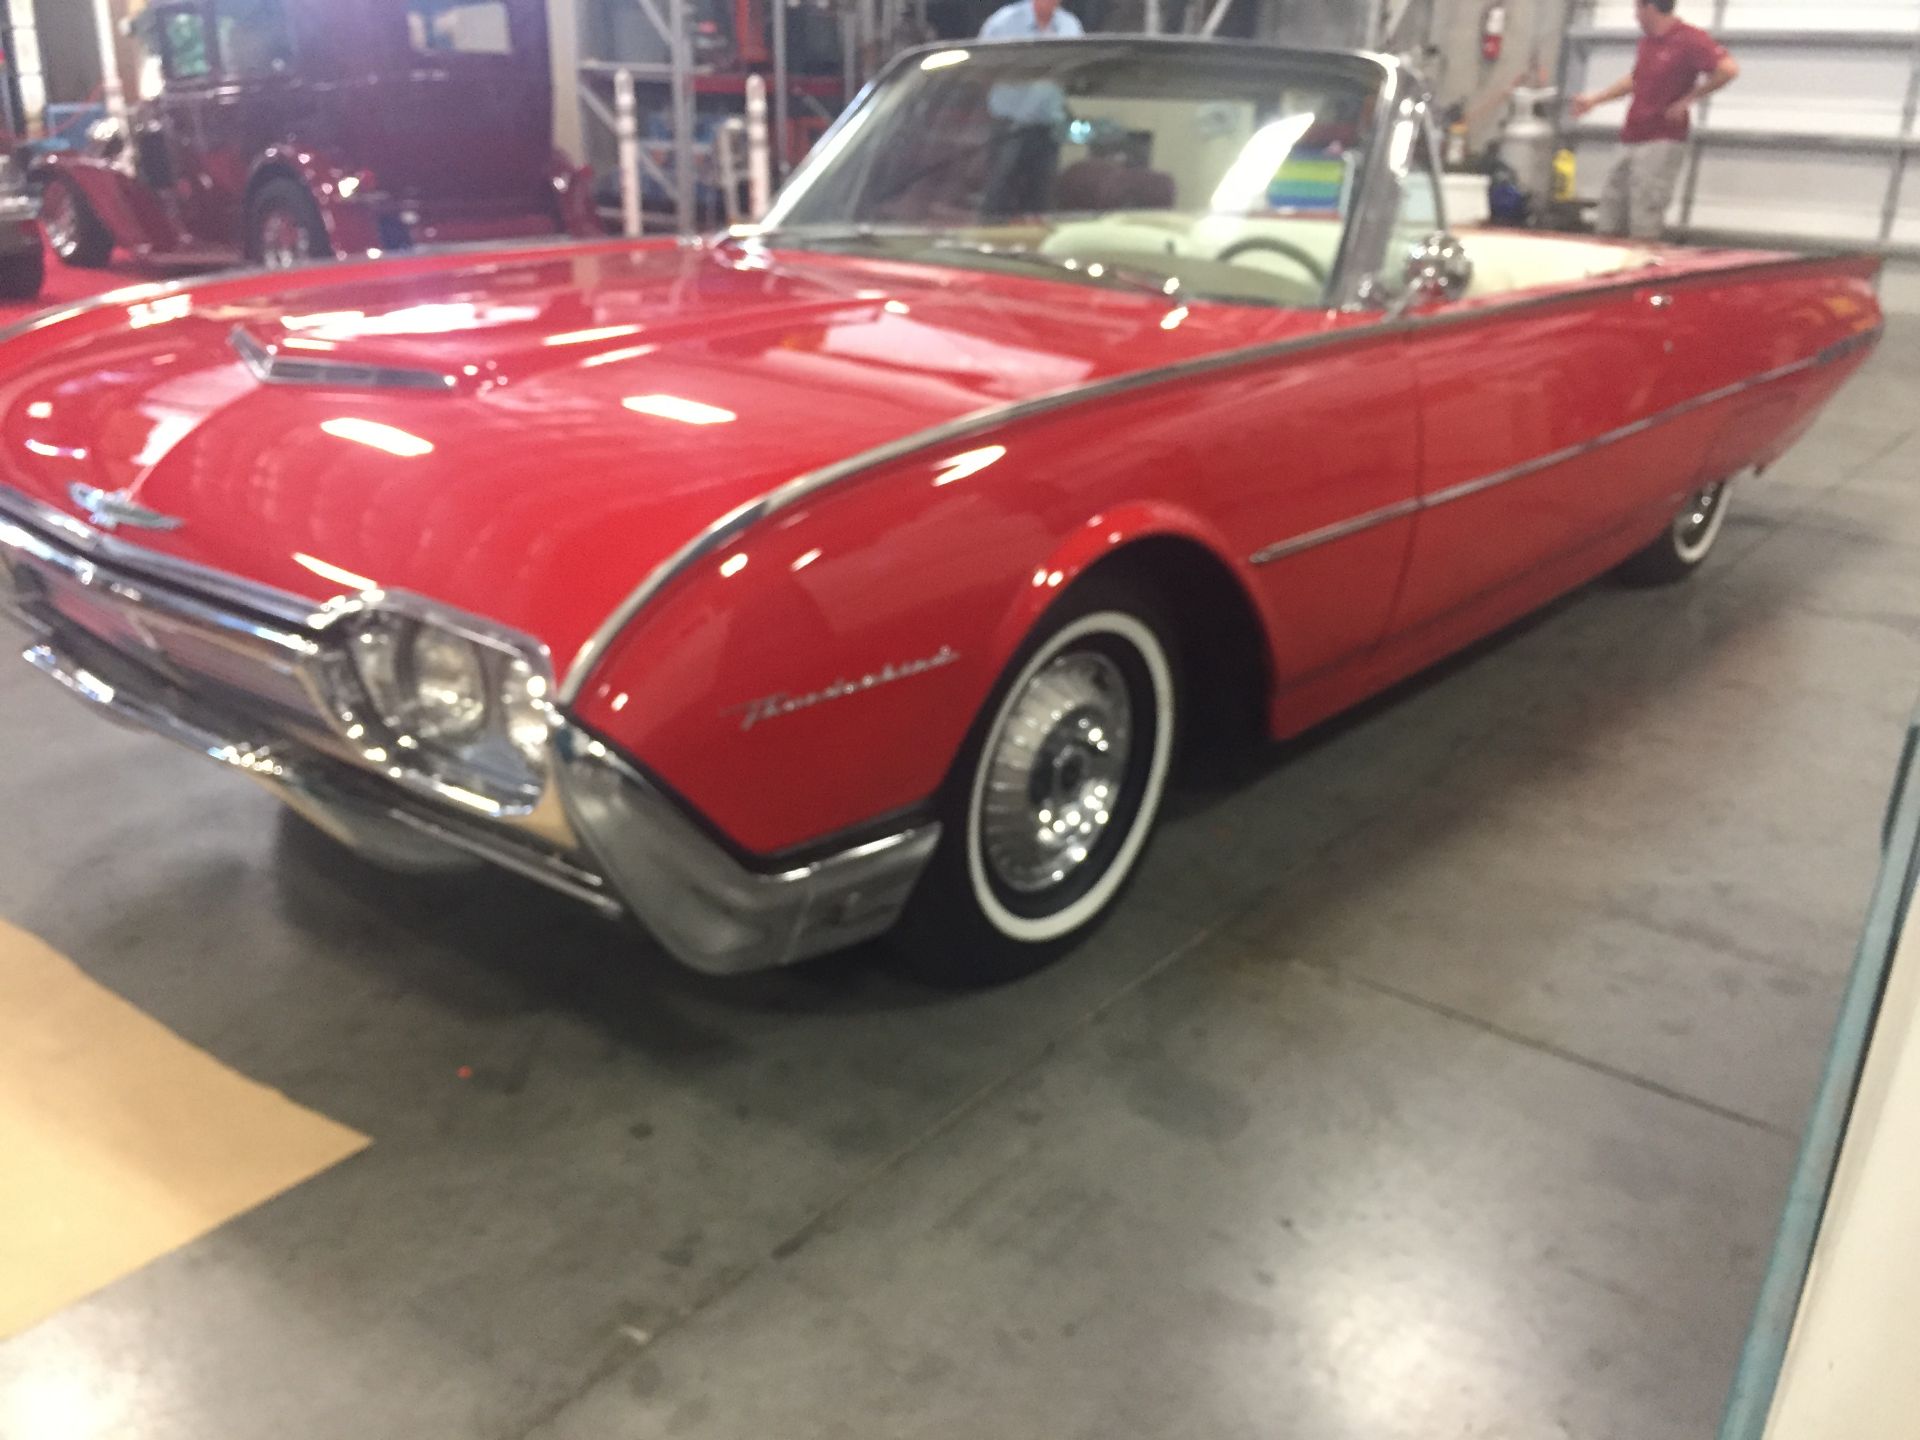 1961 CLASSIC FORD THUNDERBIRD CONVERTIBLE - Image 2 of 16